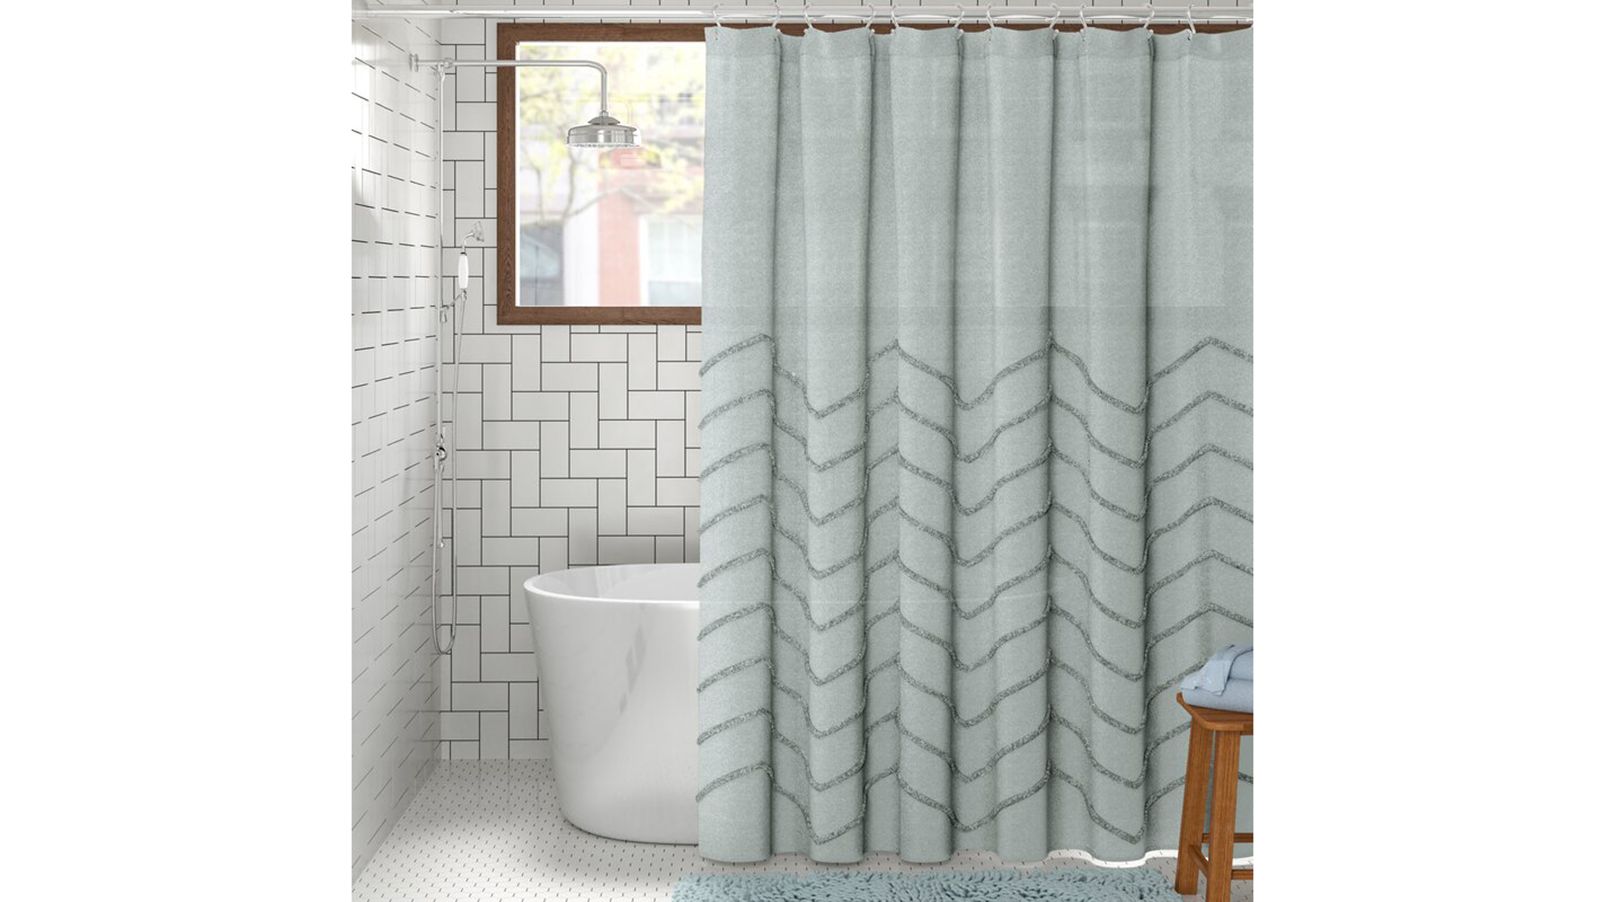 Room Divider Ideas From Carpets, Shower Curtains That Split In The Middle